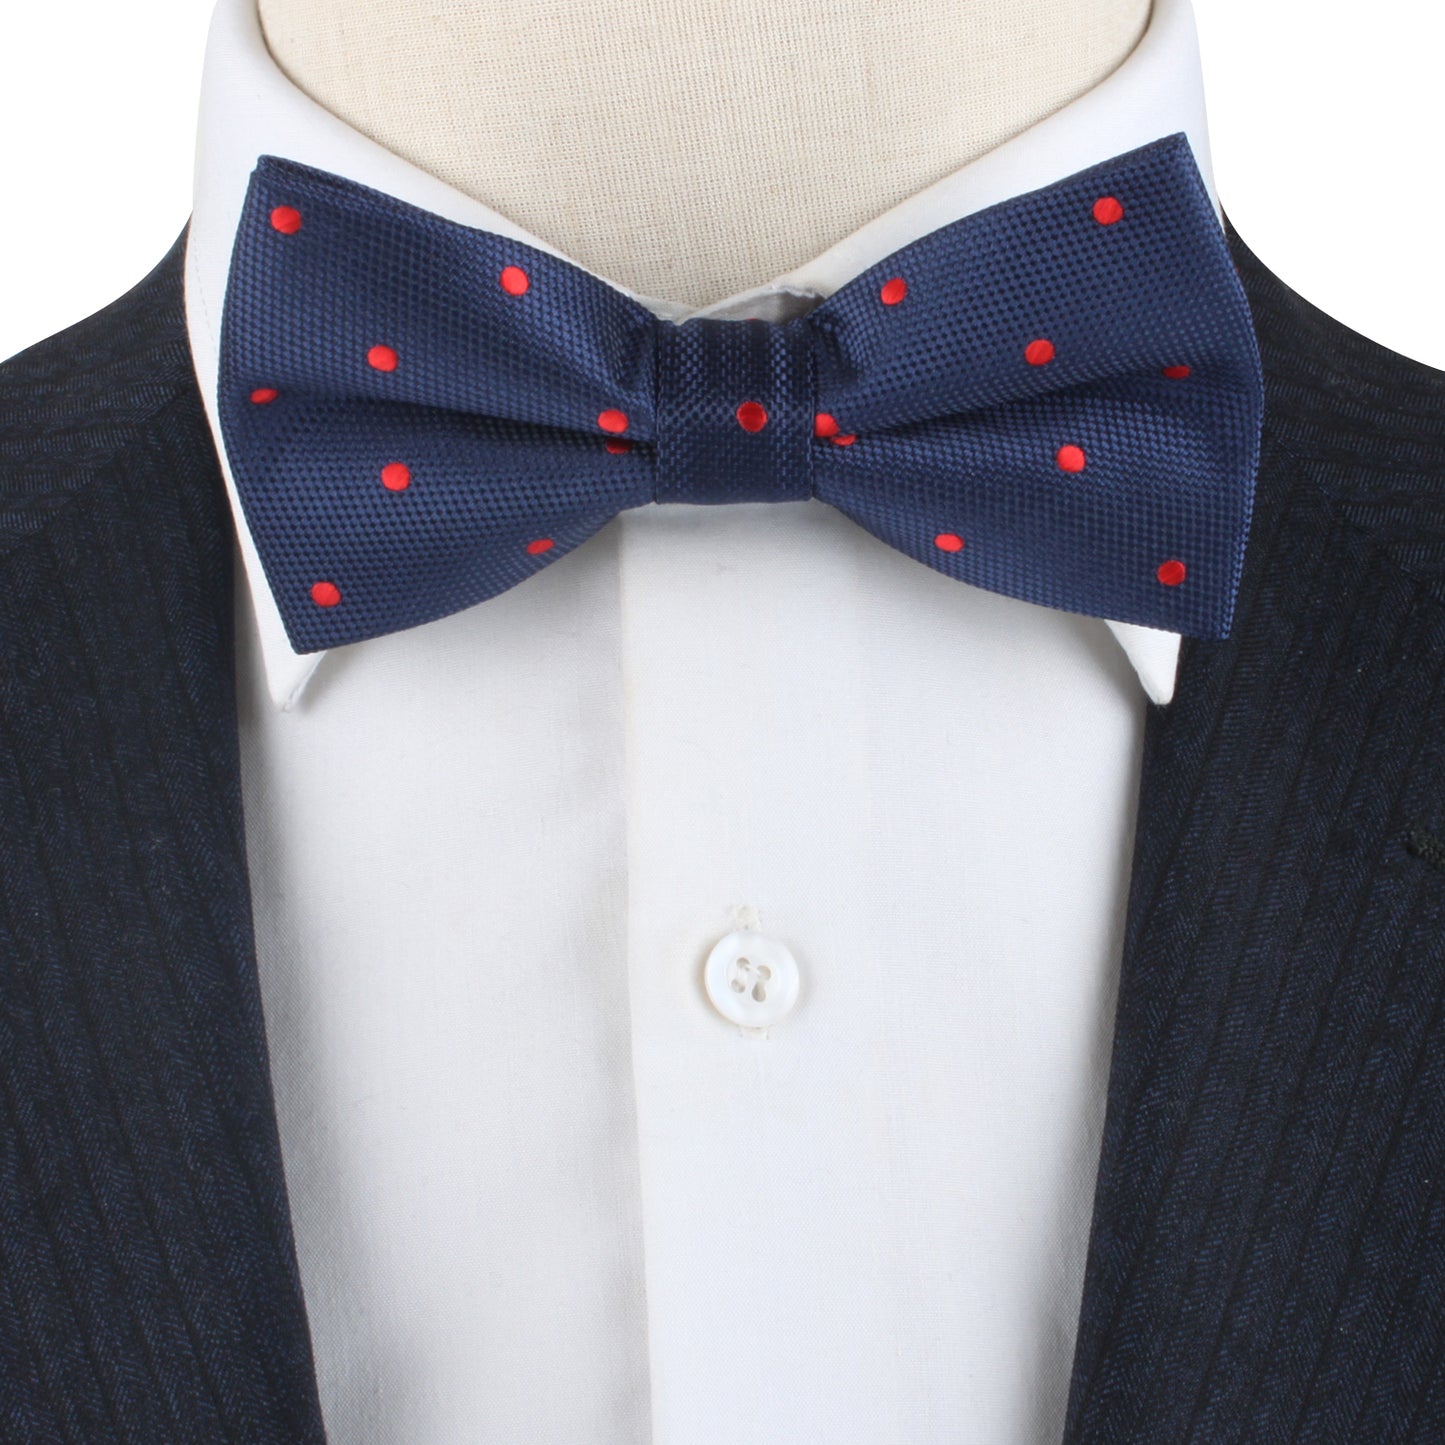 Red Polka Dot Bow Tie